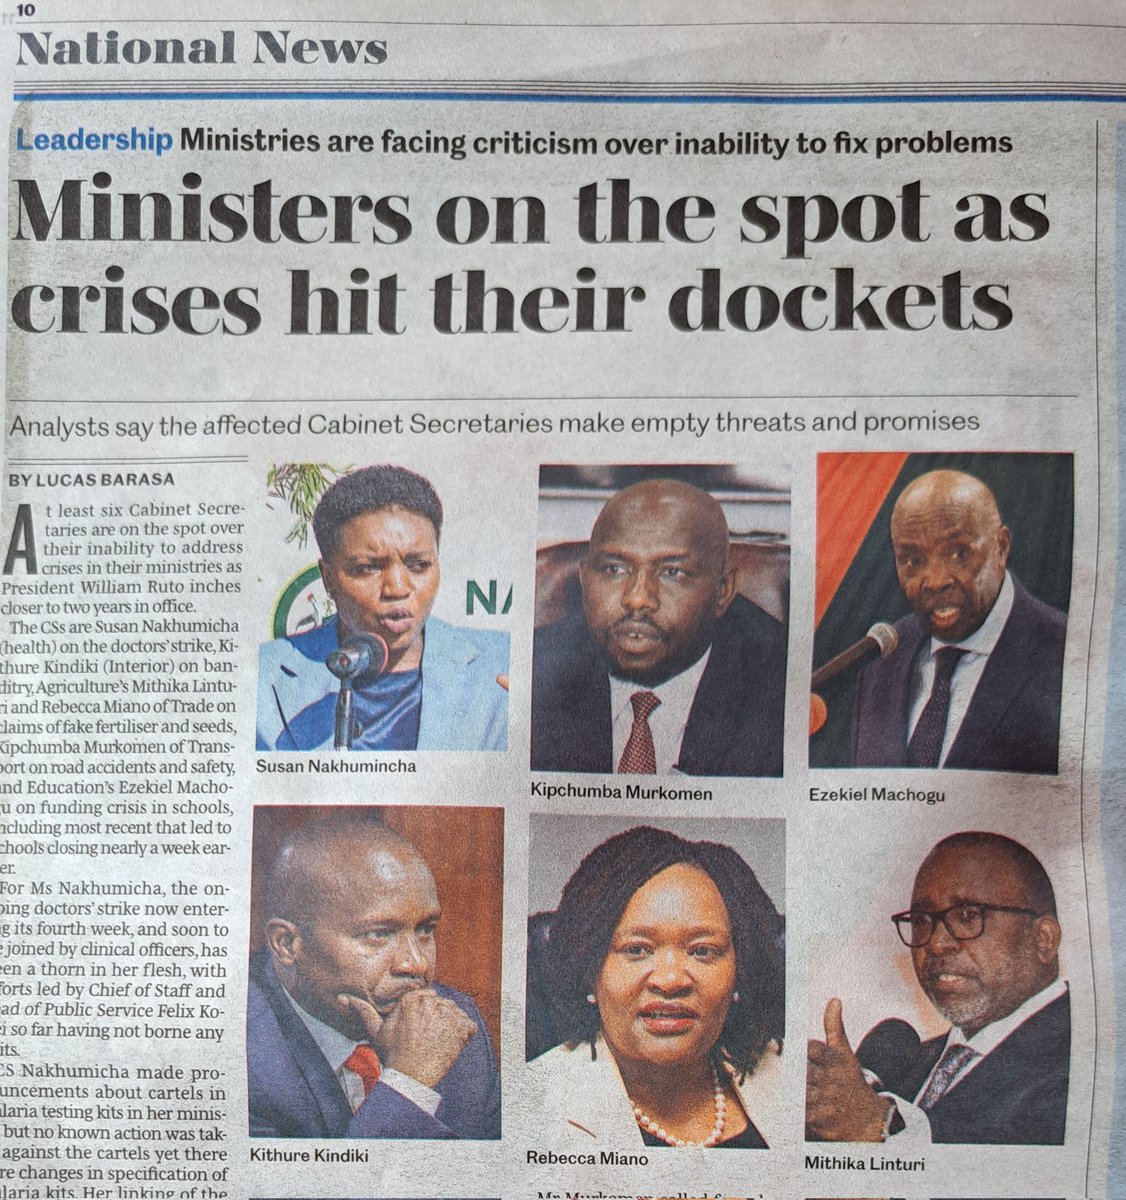 We suffer so much our media's active participation in the chicanery that bedevils our country. Ridiculous headlines like these create the erroneous impression that there are some ministerial dockets that are actually functional